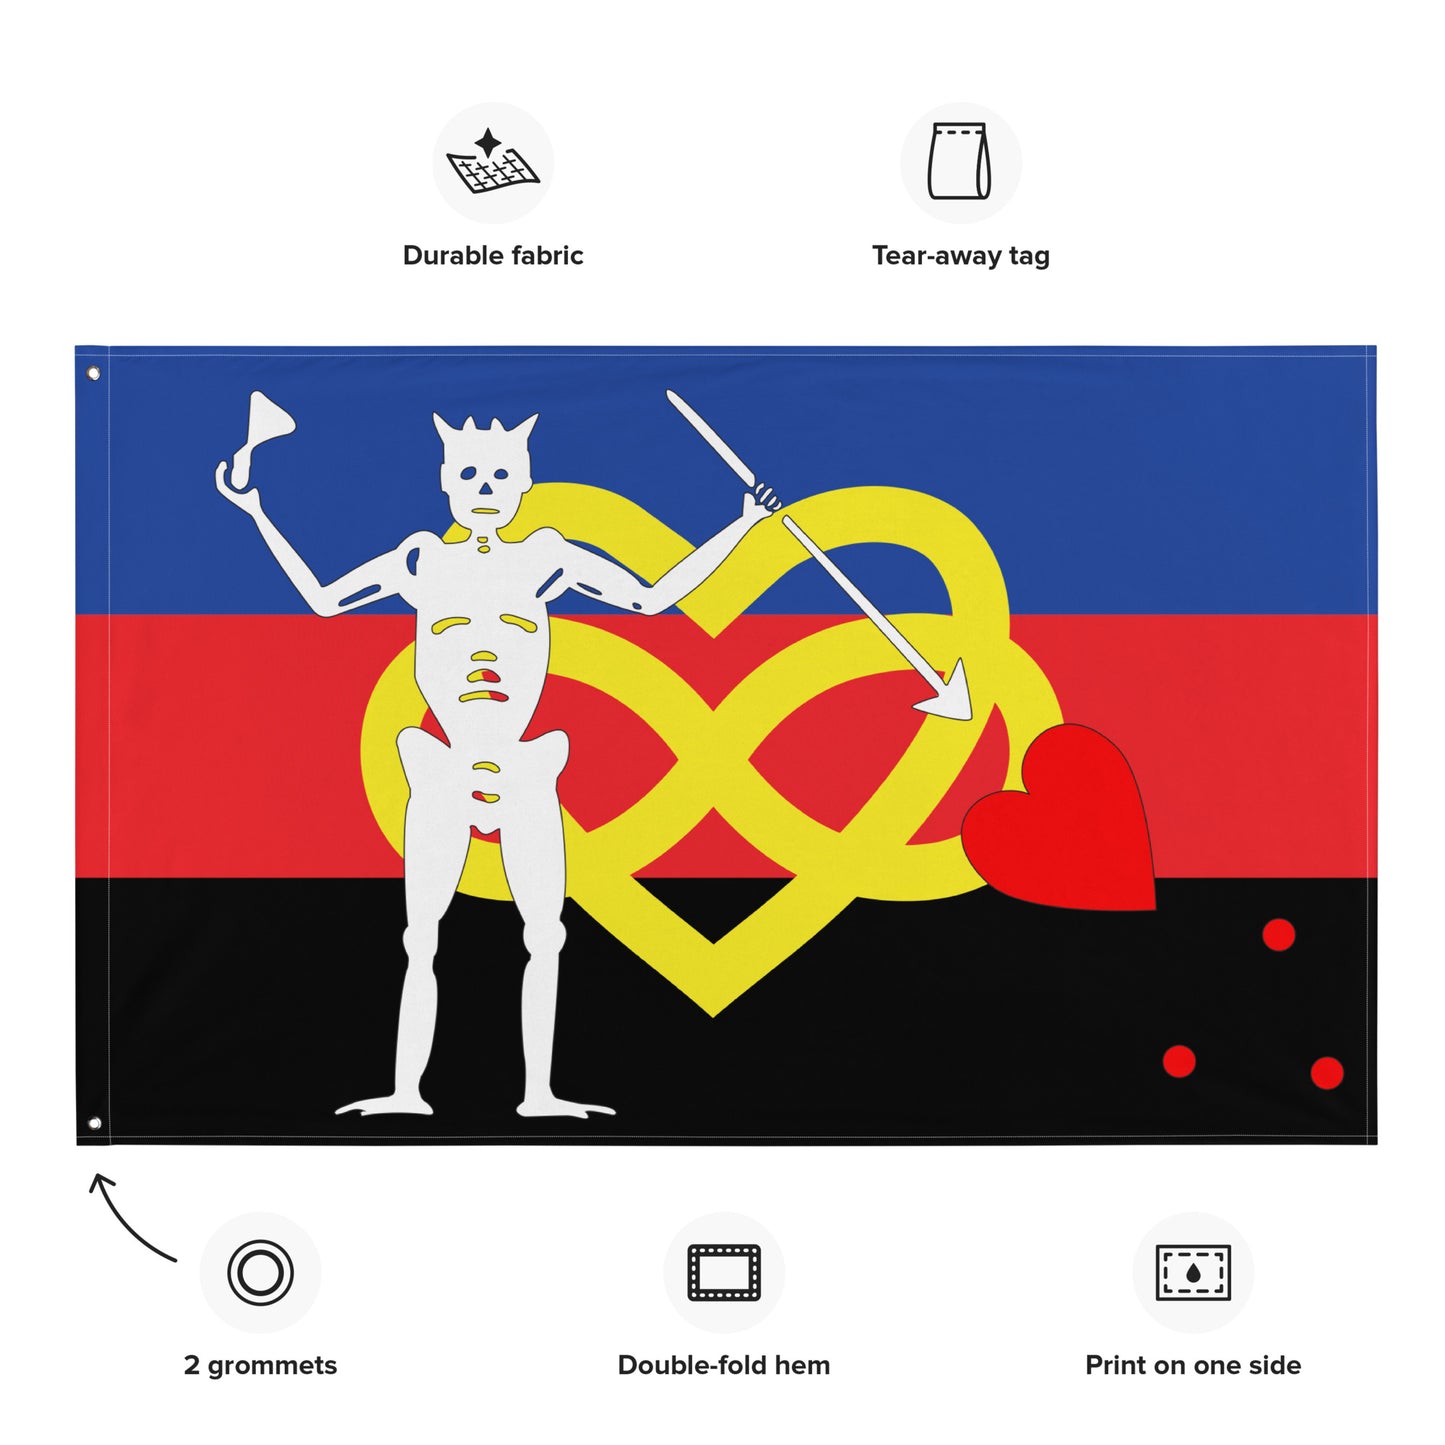 the polyamorous flag with blackbeard's symbol surrounded by the specifications of "durable fabric, tear-away tag, 2 grommets, double-fold hem, print on one side"